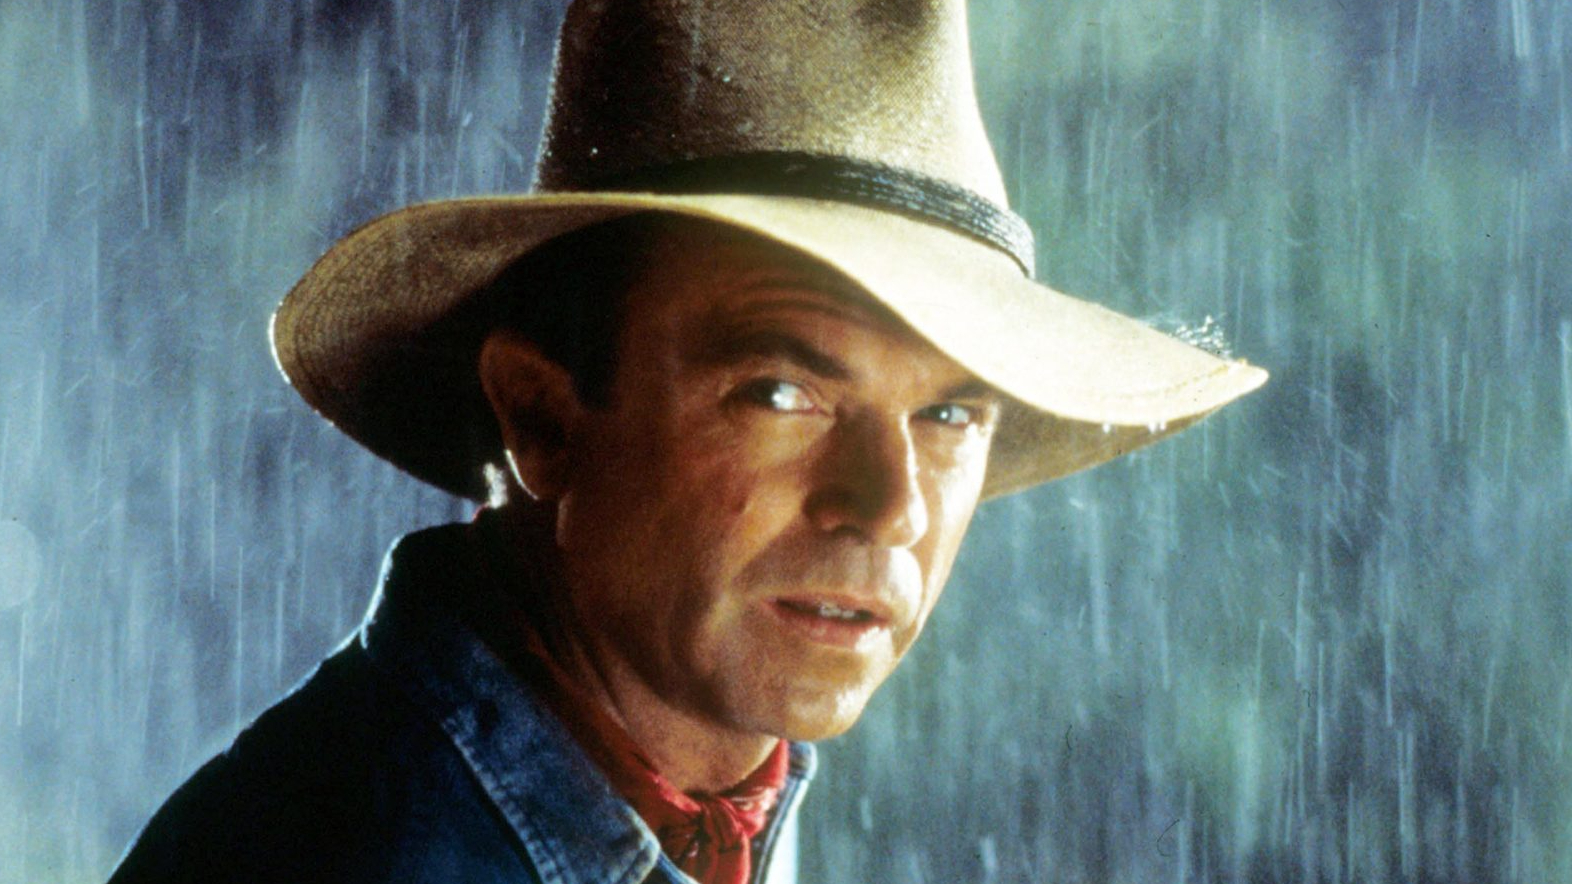 Sam Neill, Iconic Jurassic Park Actor, Is Undergoing Serious Medical Treatment